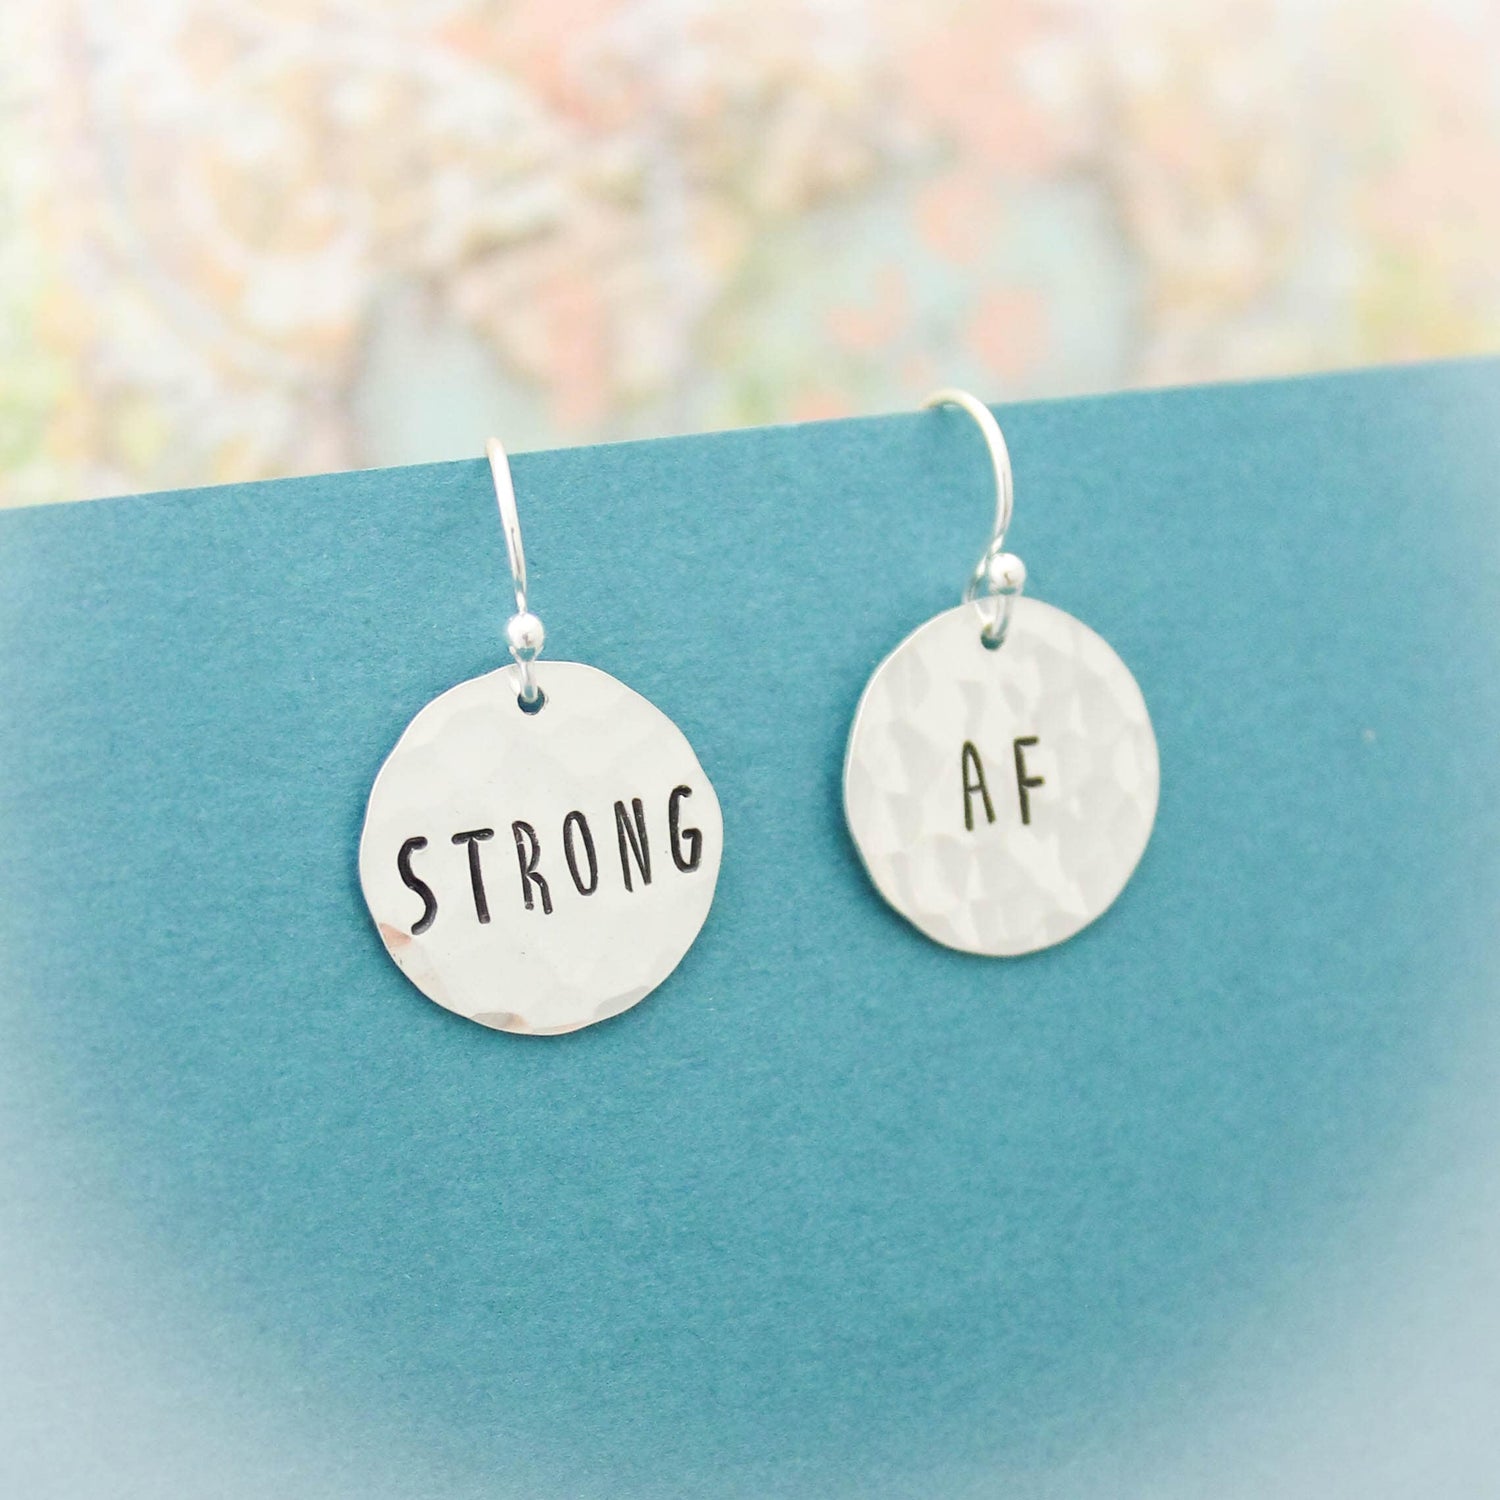 Strong AF Earrings in Sterling Silver, Motivational Inspirational Jewelry, Gifts for Her, Strong As Fuck Jewelry, Curse Word Jewelry Gift